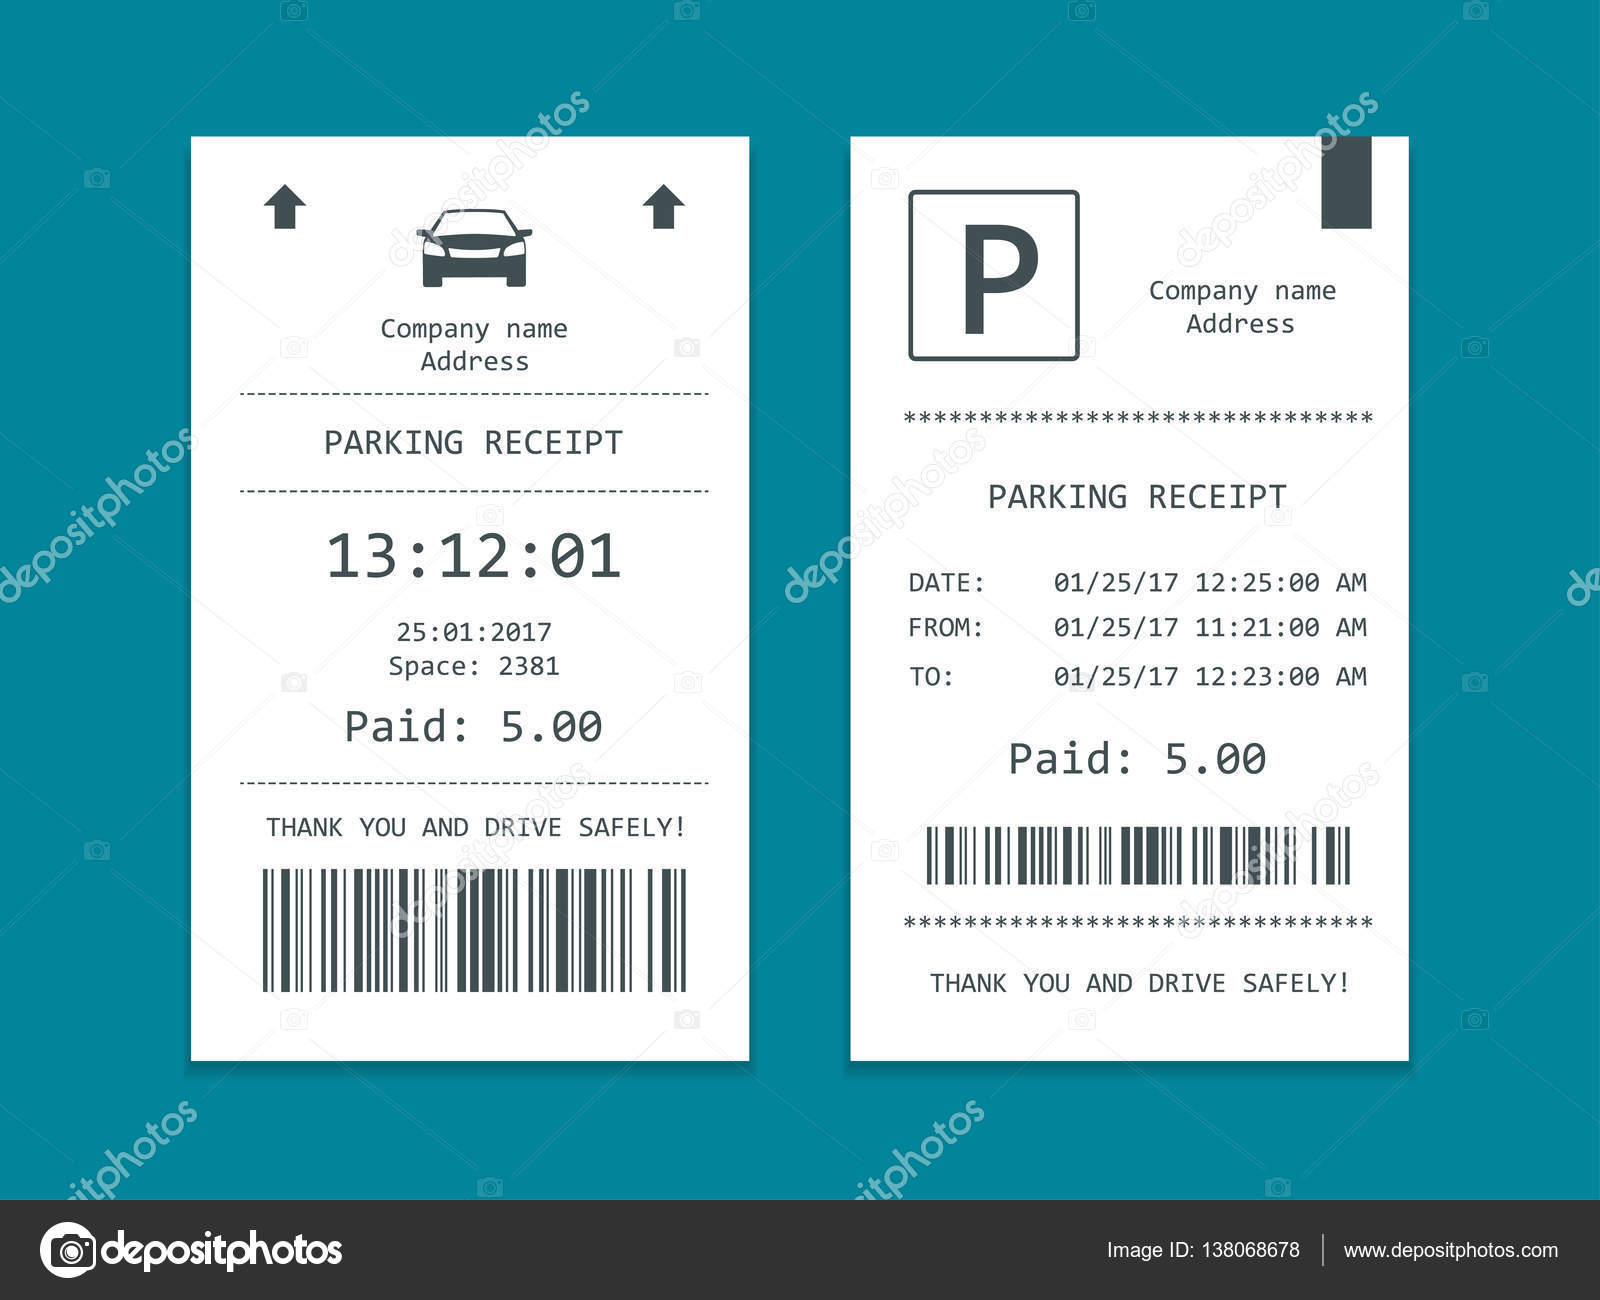 Isometric Parking Attendant. Parking ticket machines and barrier gate arm  operators are installed at the entrance and exit of parking area as tools  to charge parking fee. Stock Vector by ©Golden Sikorka